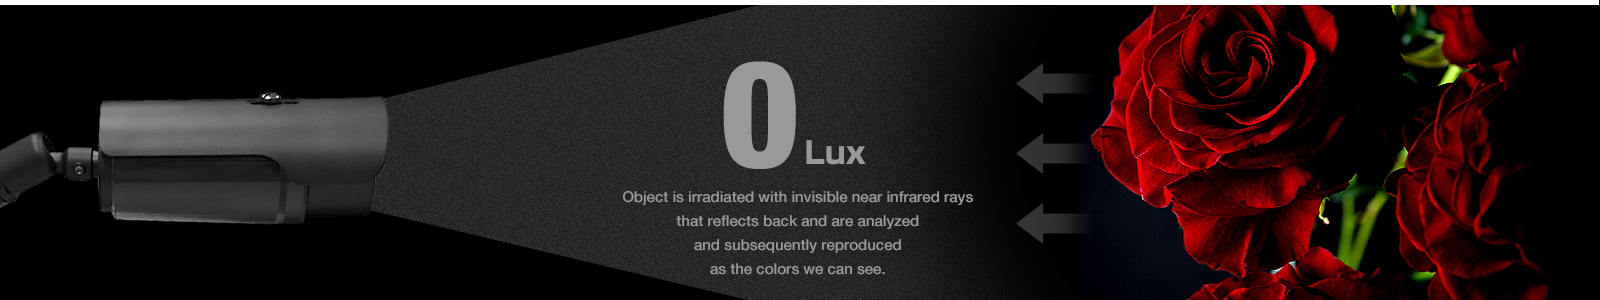 0Lux　Object is irradiated with invisible near infrared raysthat reflects back and are analyzed and subsequently reproduced as the colors we can see.